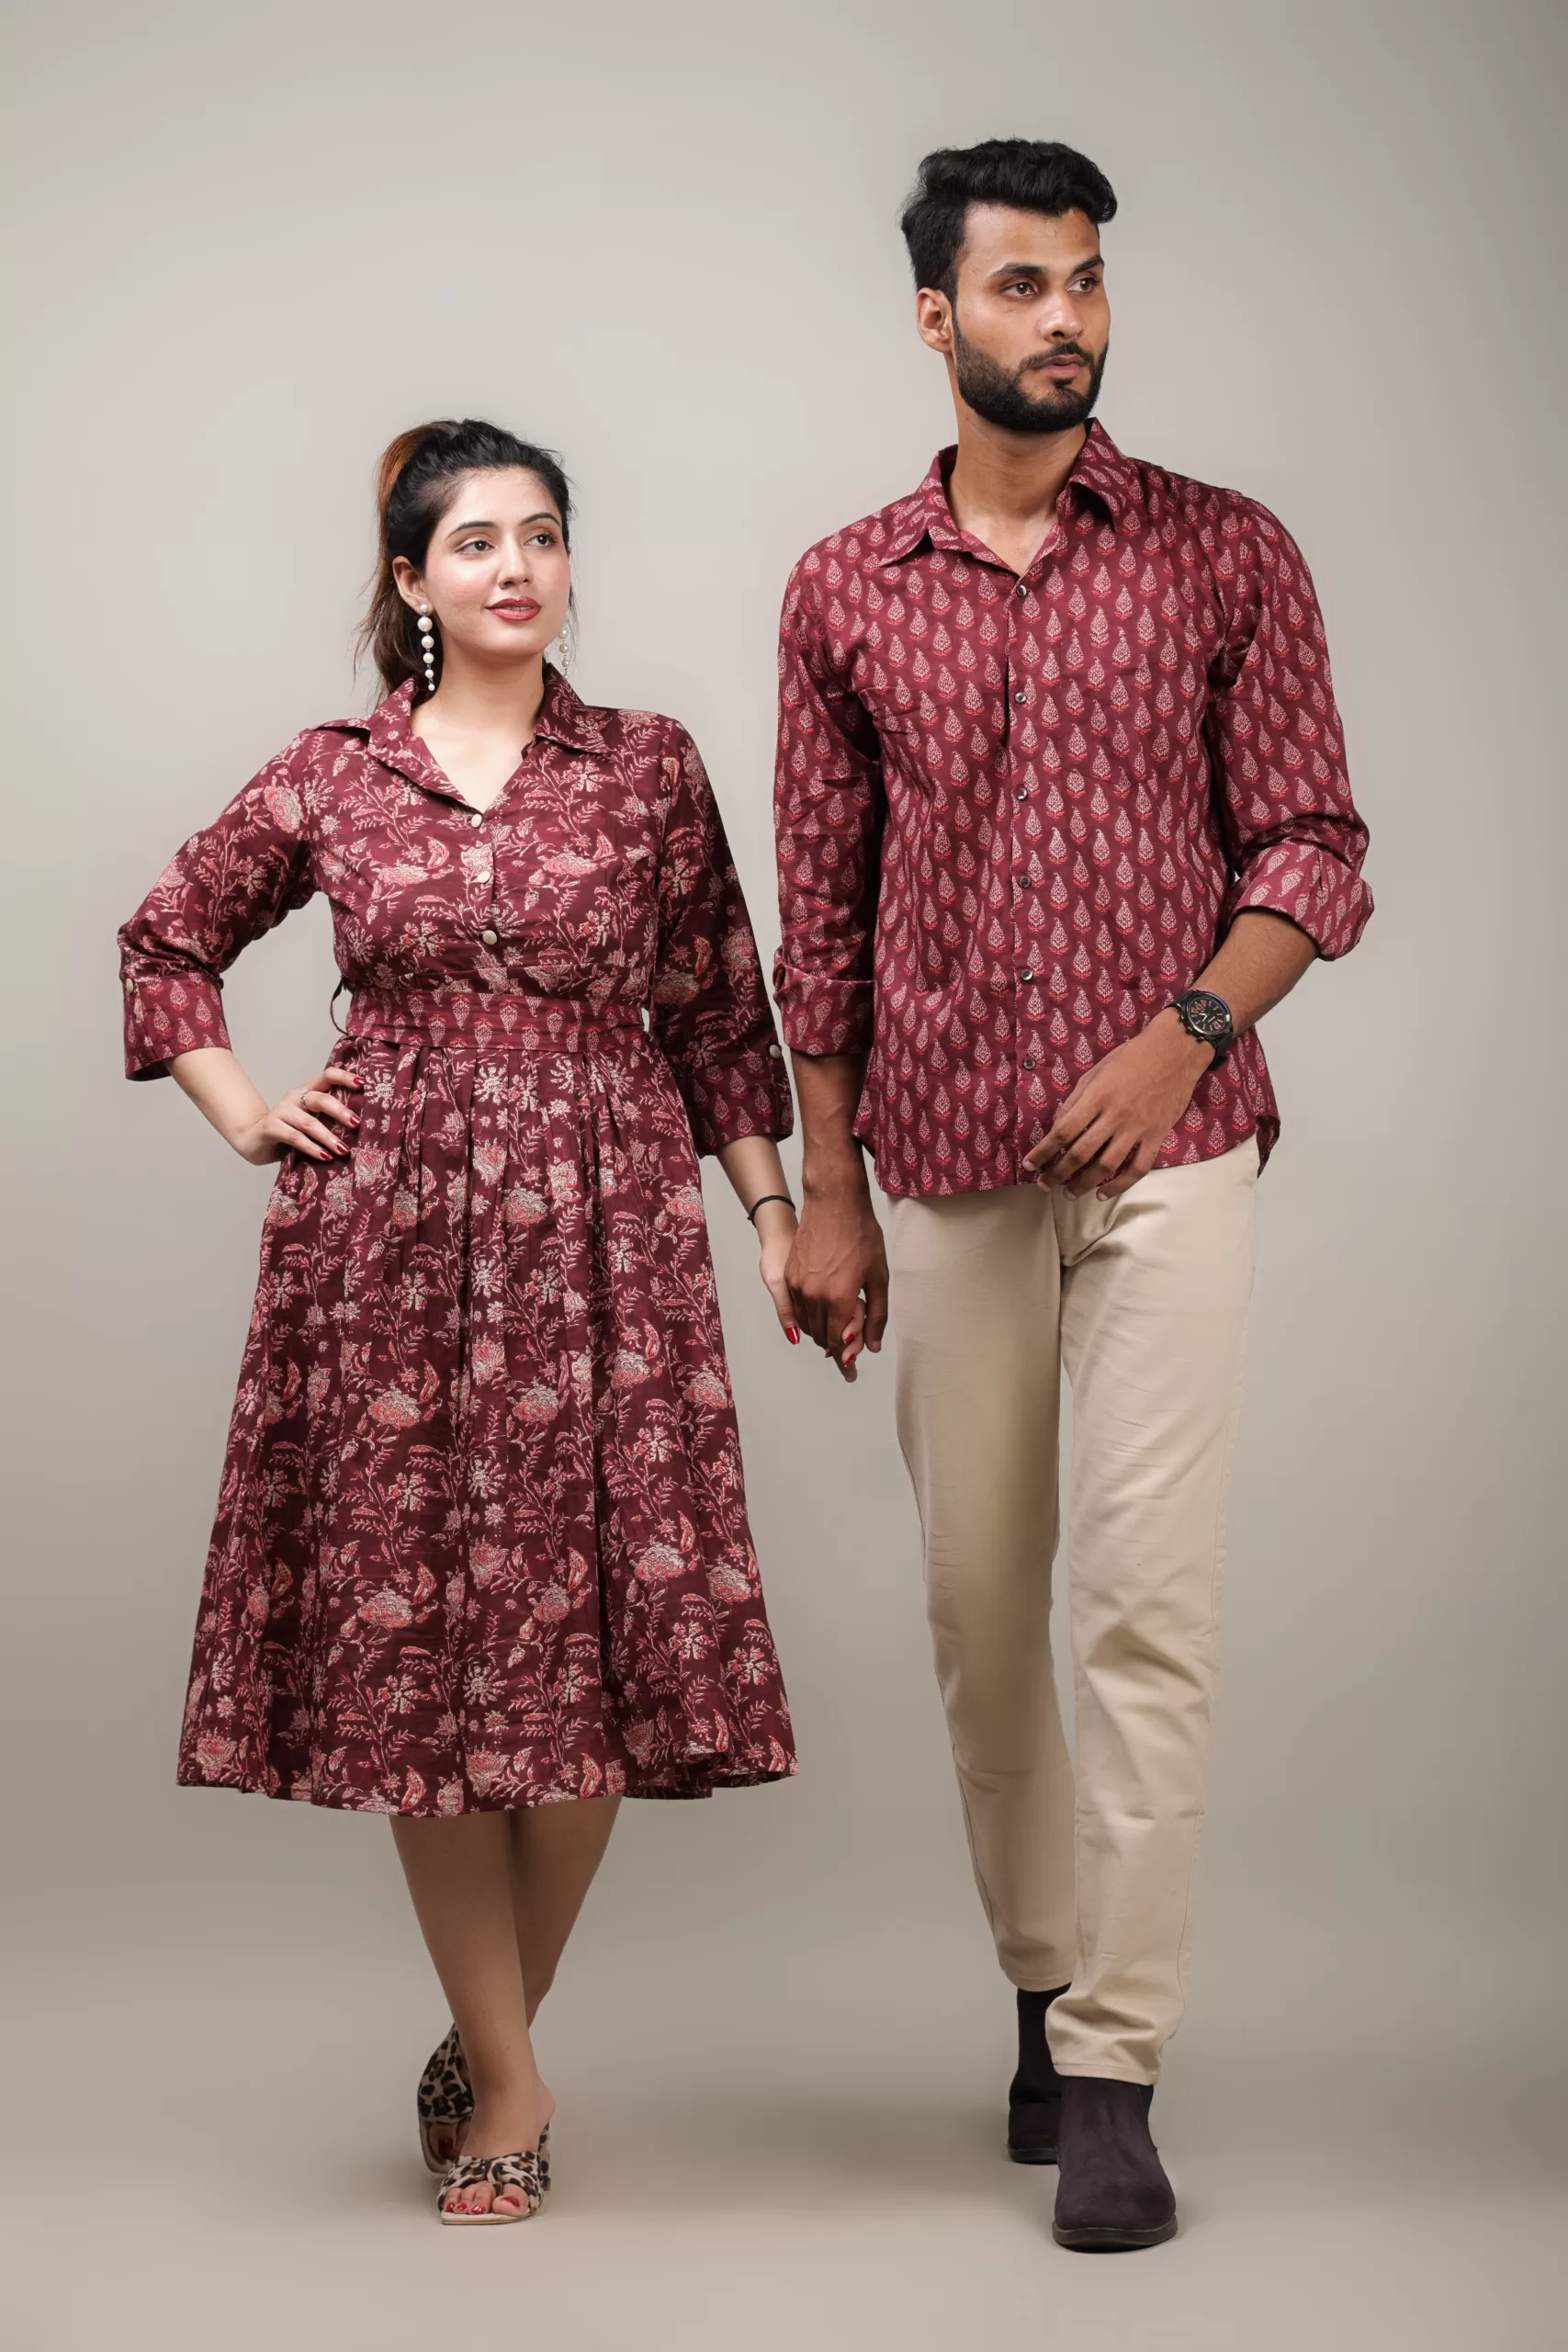 Gown Dress Couple Tshirts - Buy Gown Dress Couple Tshirts Online at Best  Prices In India | Flipkart.com